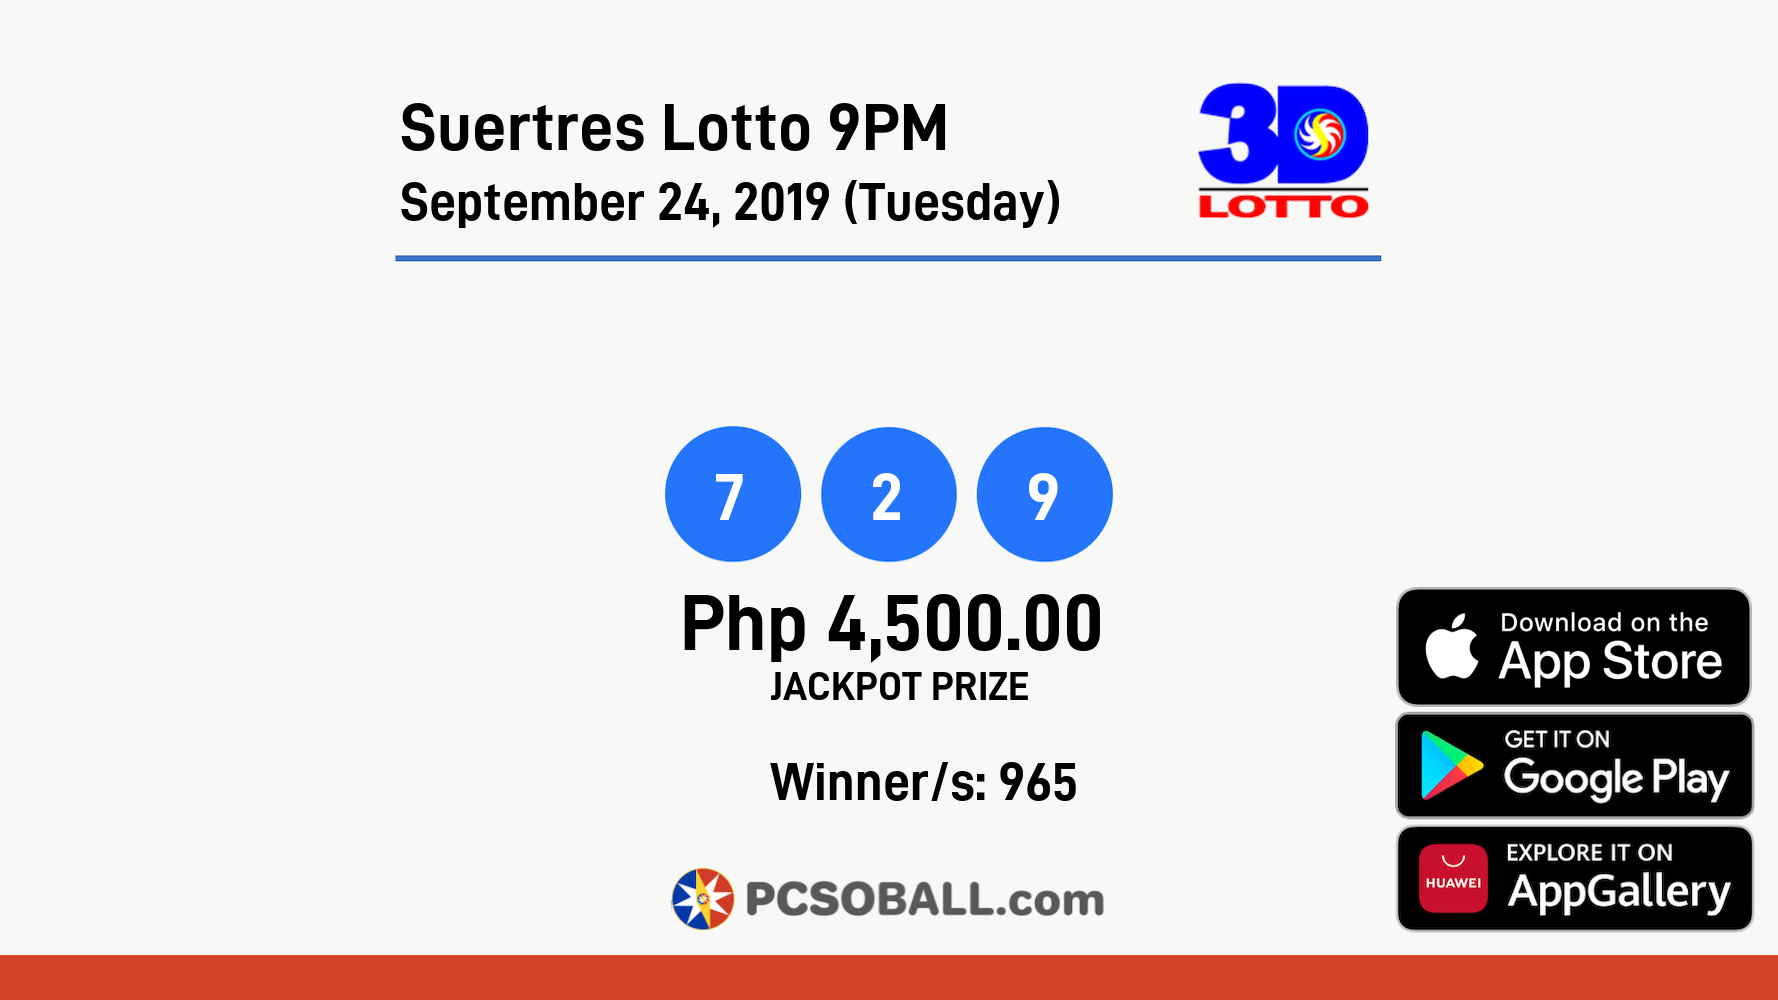 Suertres Lotto 9PM September 24, 2019 (Tuesday) Result